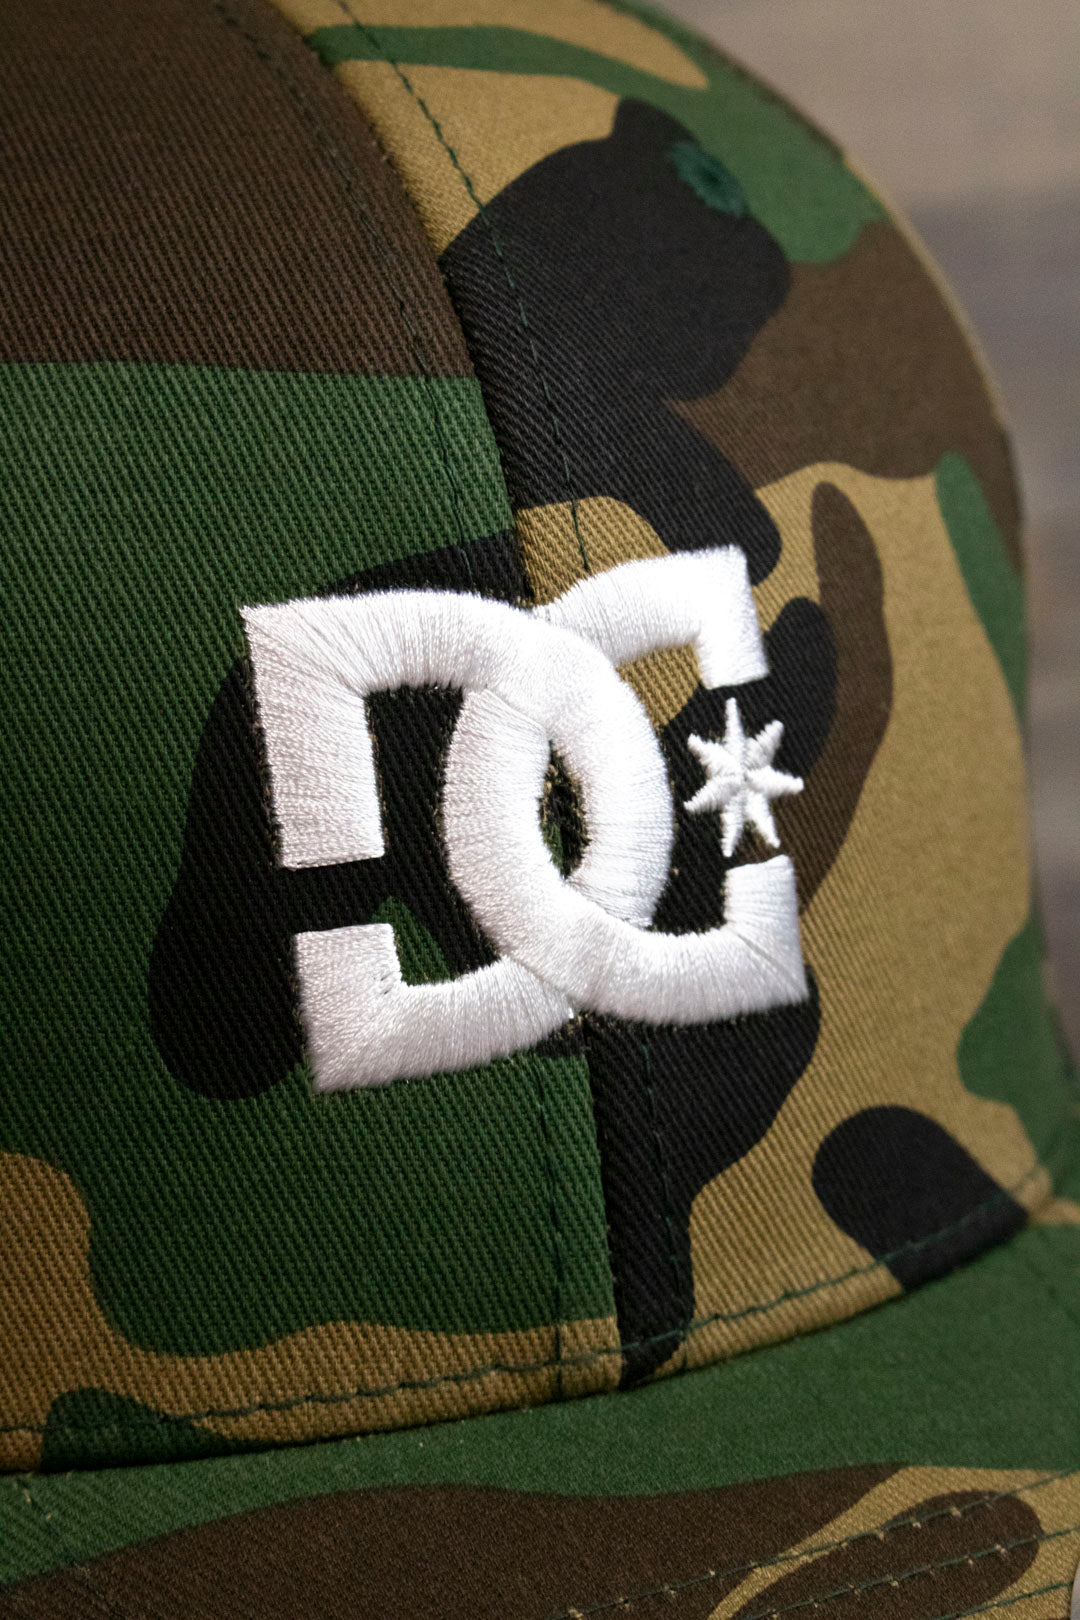 the logo on the Camouflage Print Skater Hat | DC Shoes Black Bottom Camo Flexfit Cap is made of white satin embroidery